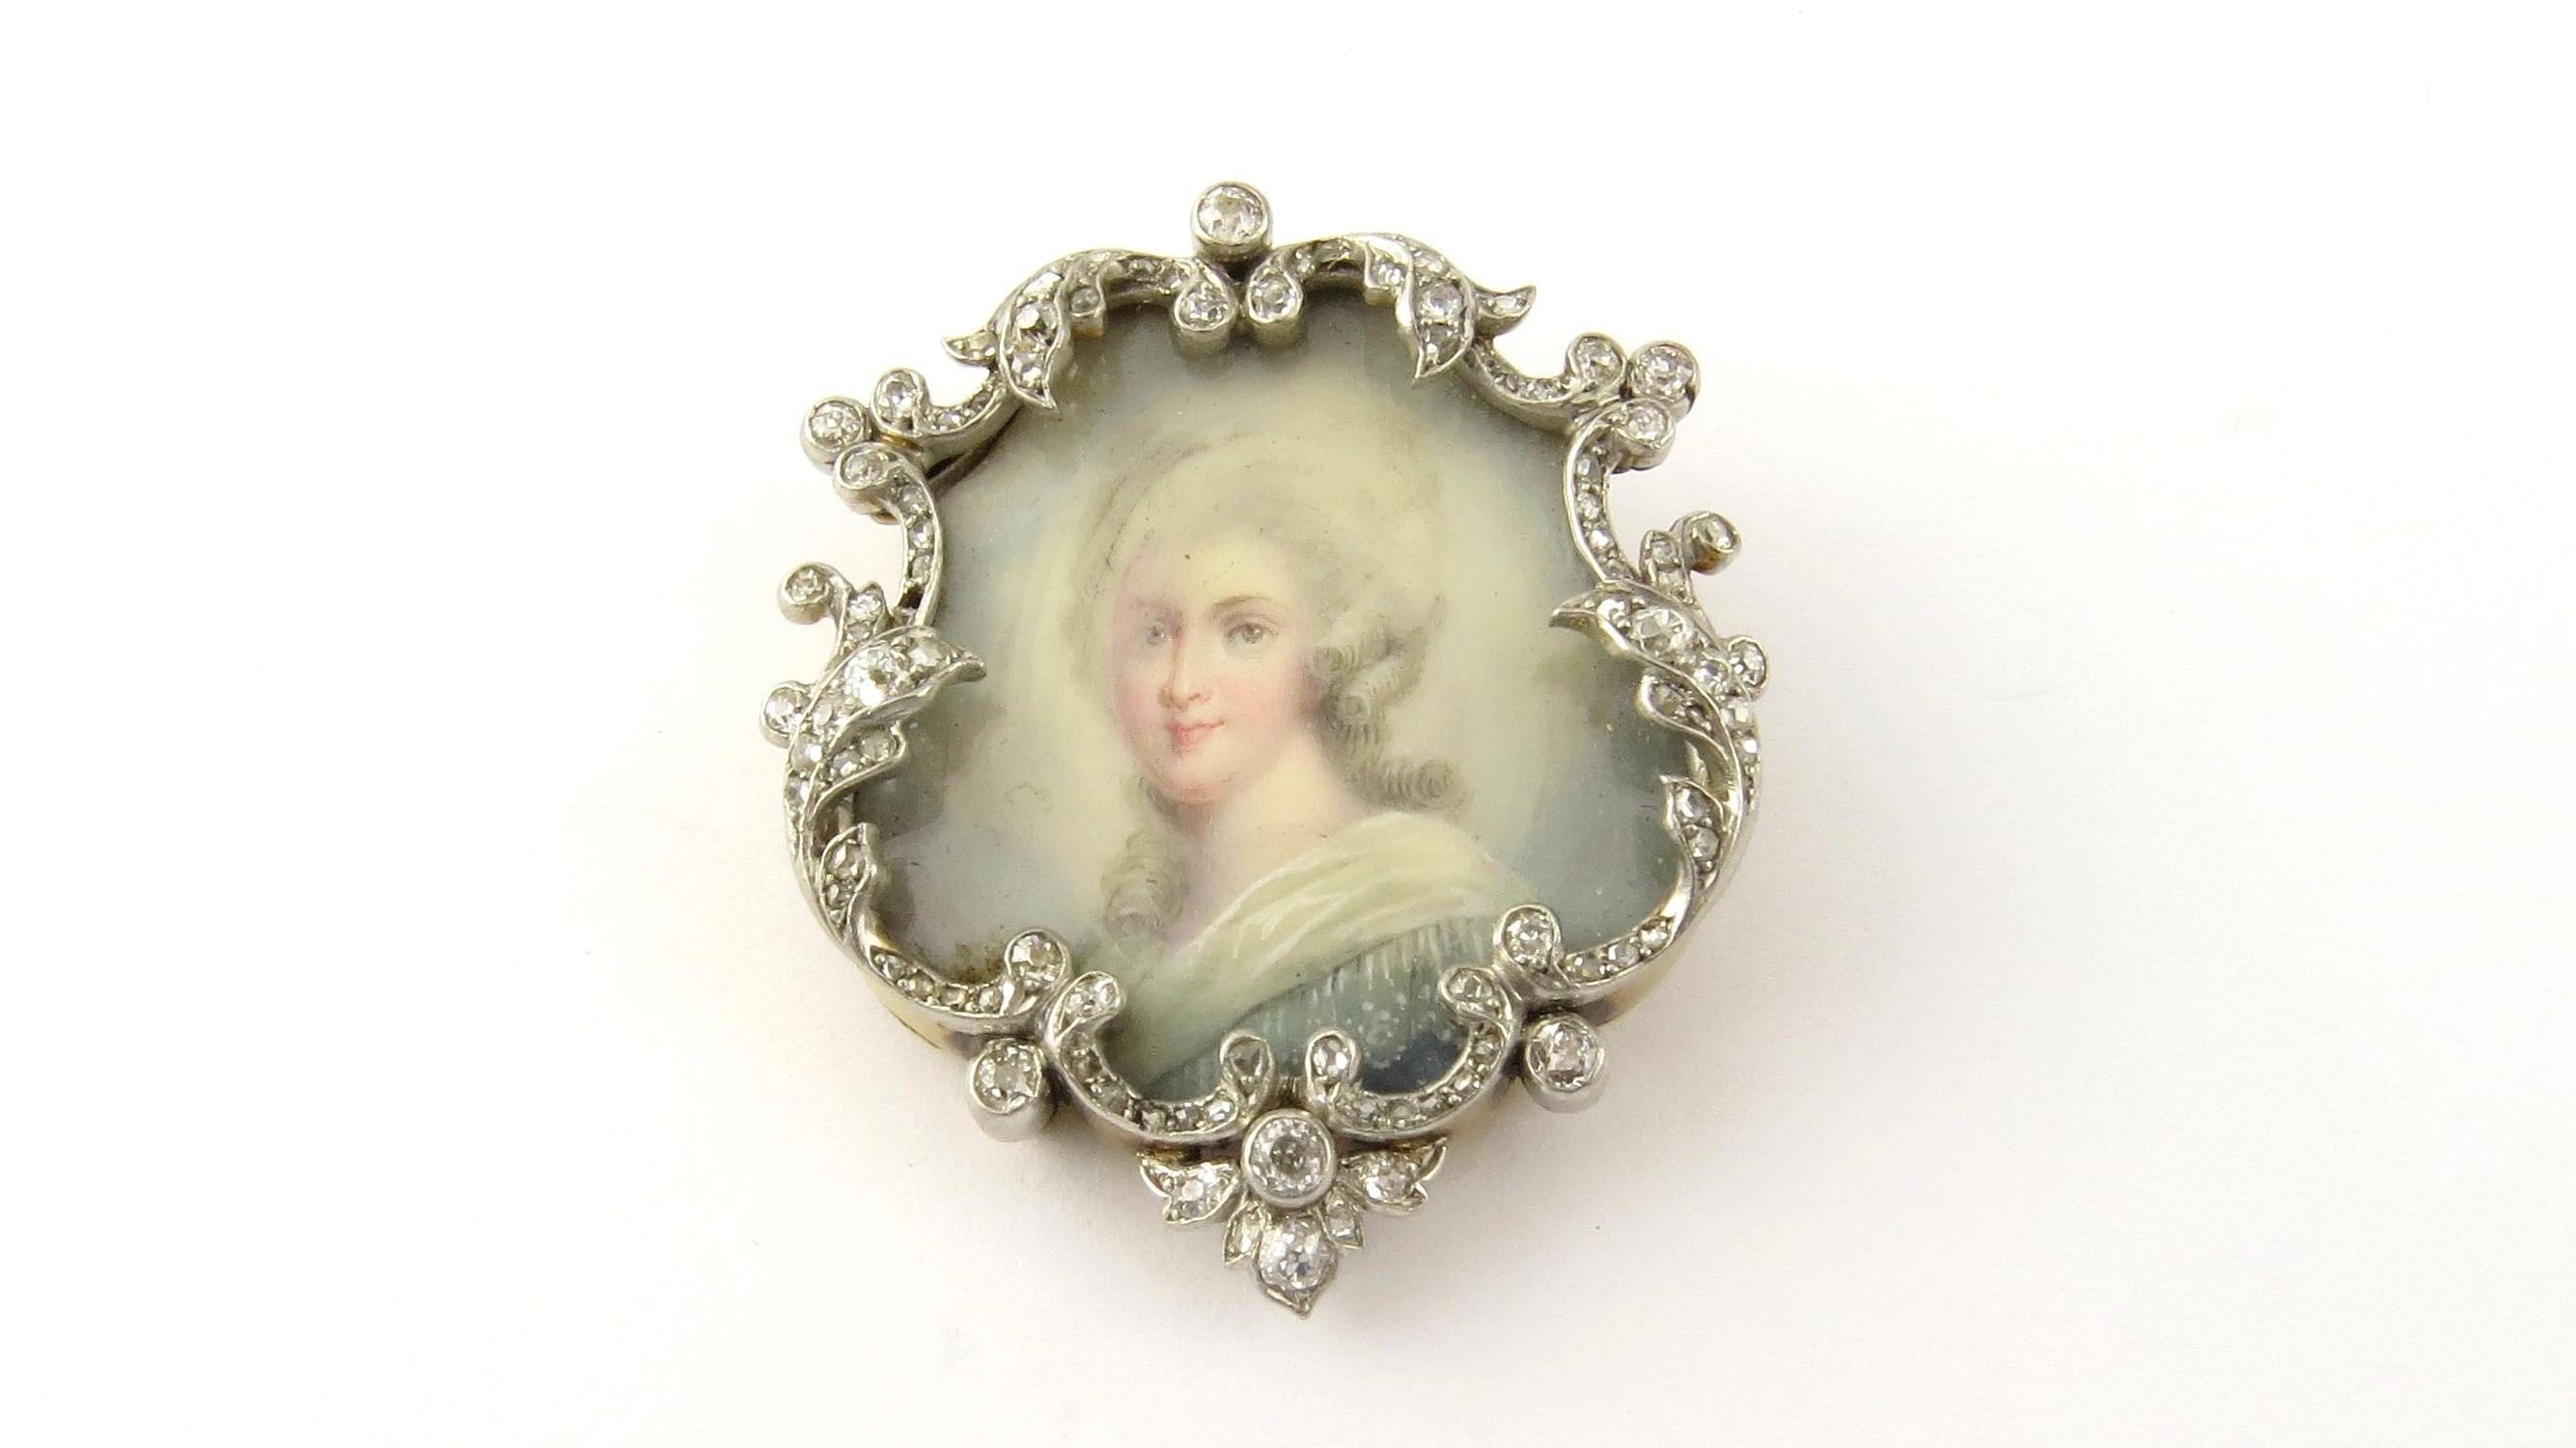 Antique Victorian 18 Karat Yellow Gold and Diamond Portrait Brooch/Pin-

This exquisite 18K gold brooch features a portrait of a lovely lady surrounded with a wreath frame decorated with 92 old mine and rose cut diamonds set in silver, as was